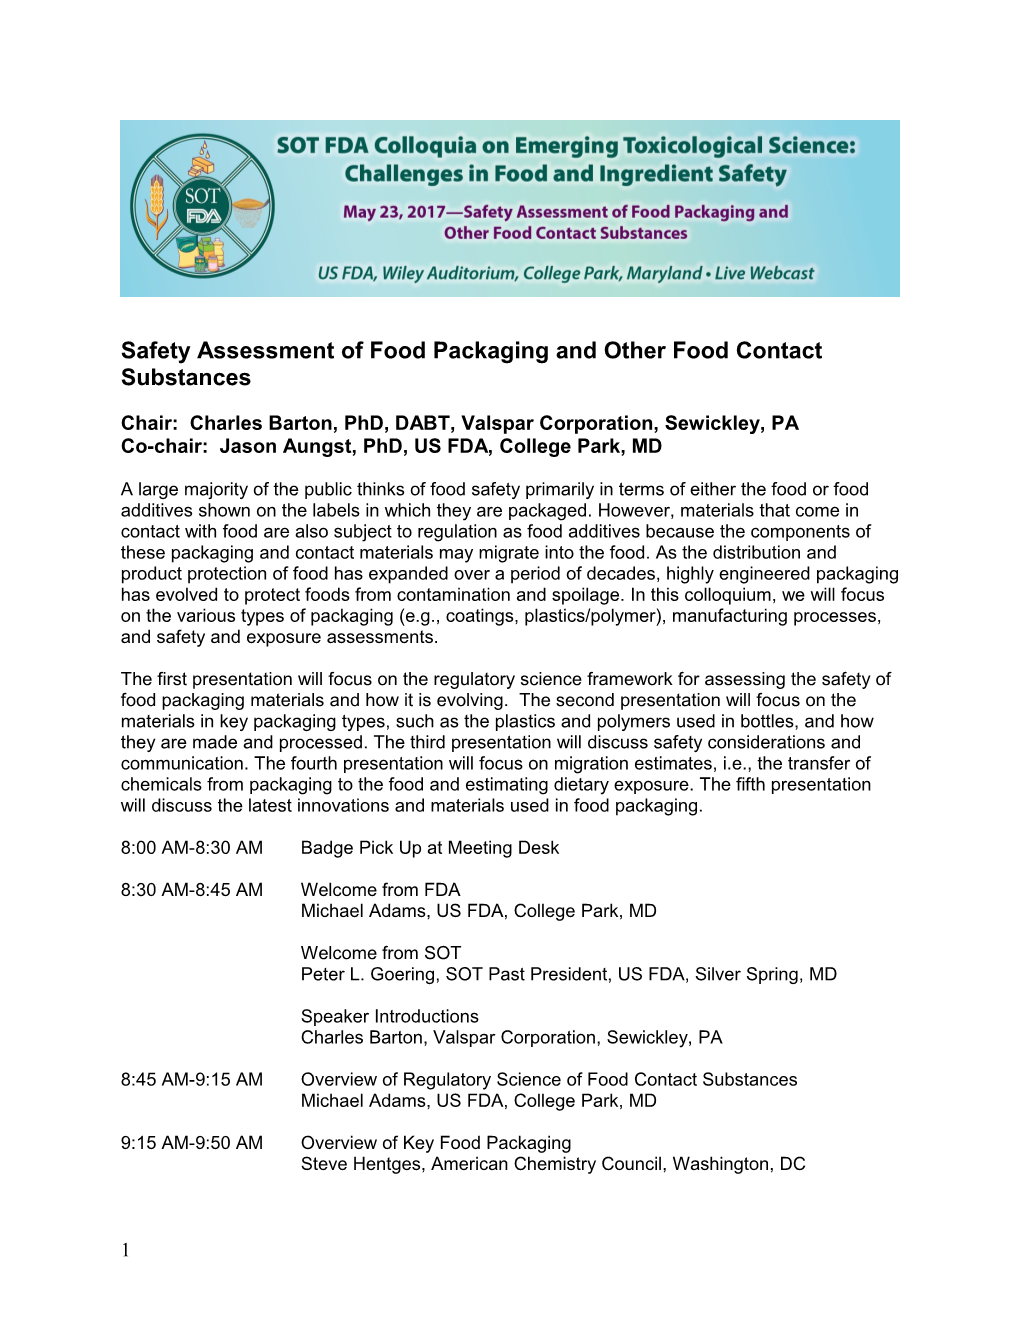 Safety Assessment of Food Packaging and Other Food Contact Substances